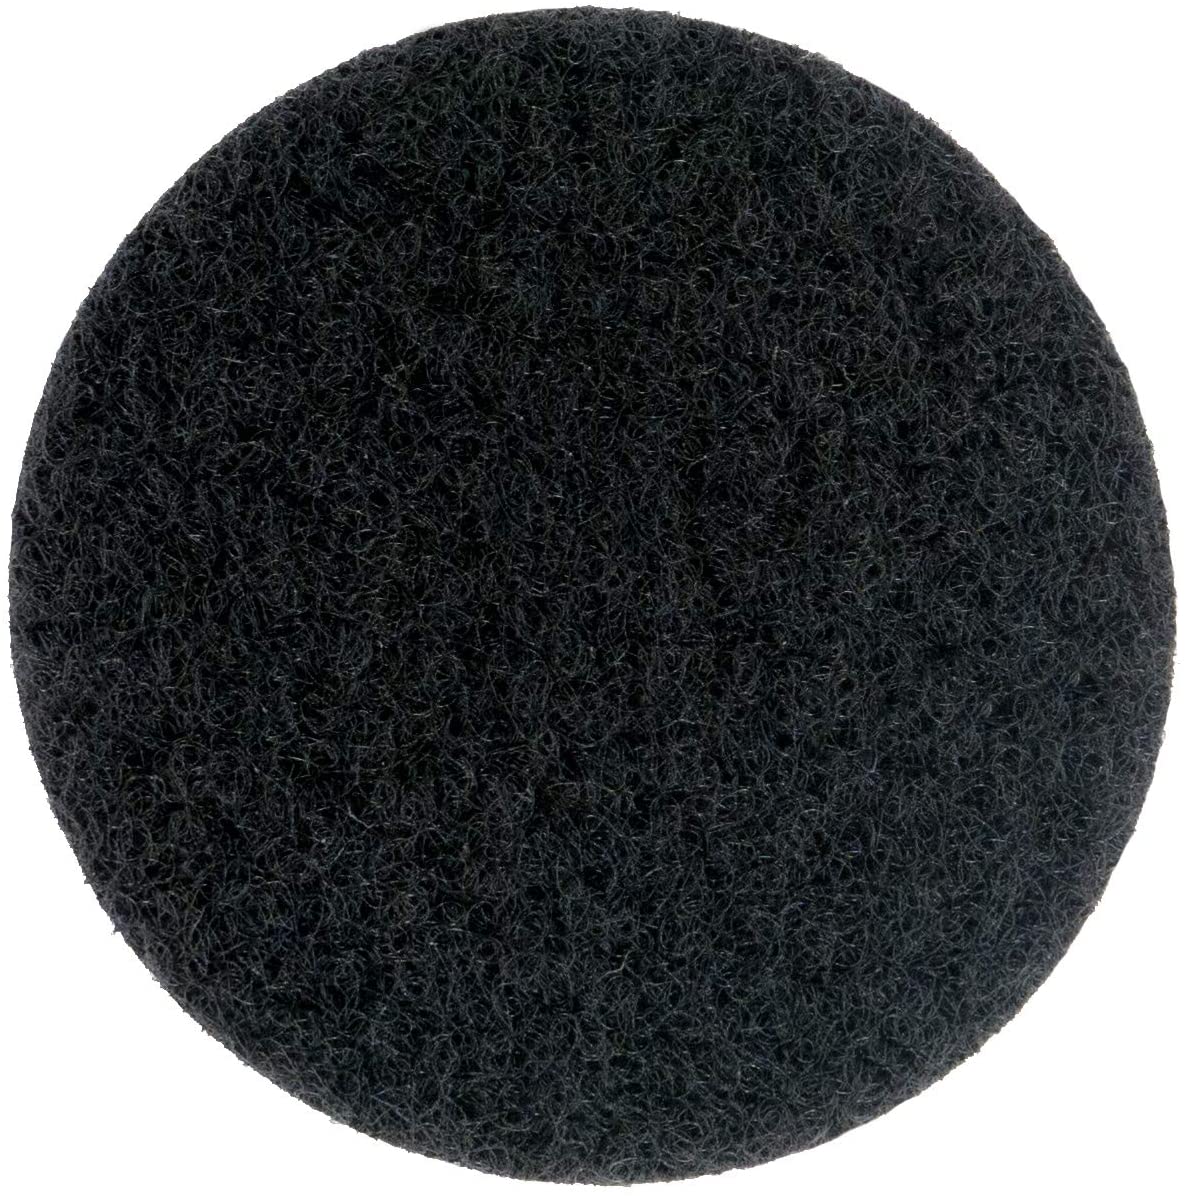 Black Adhesive Velcro Dots <br> (10 Pack)